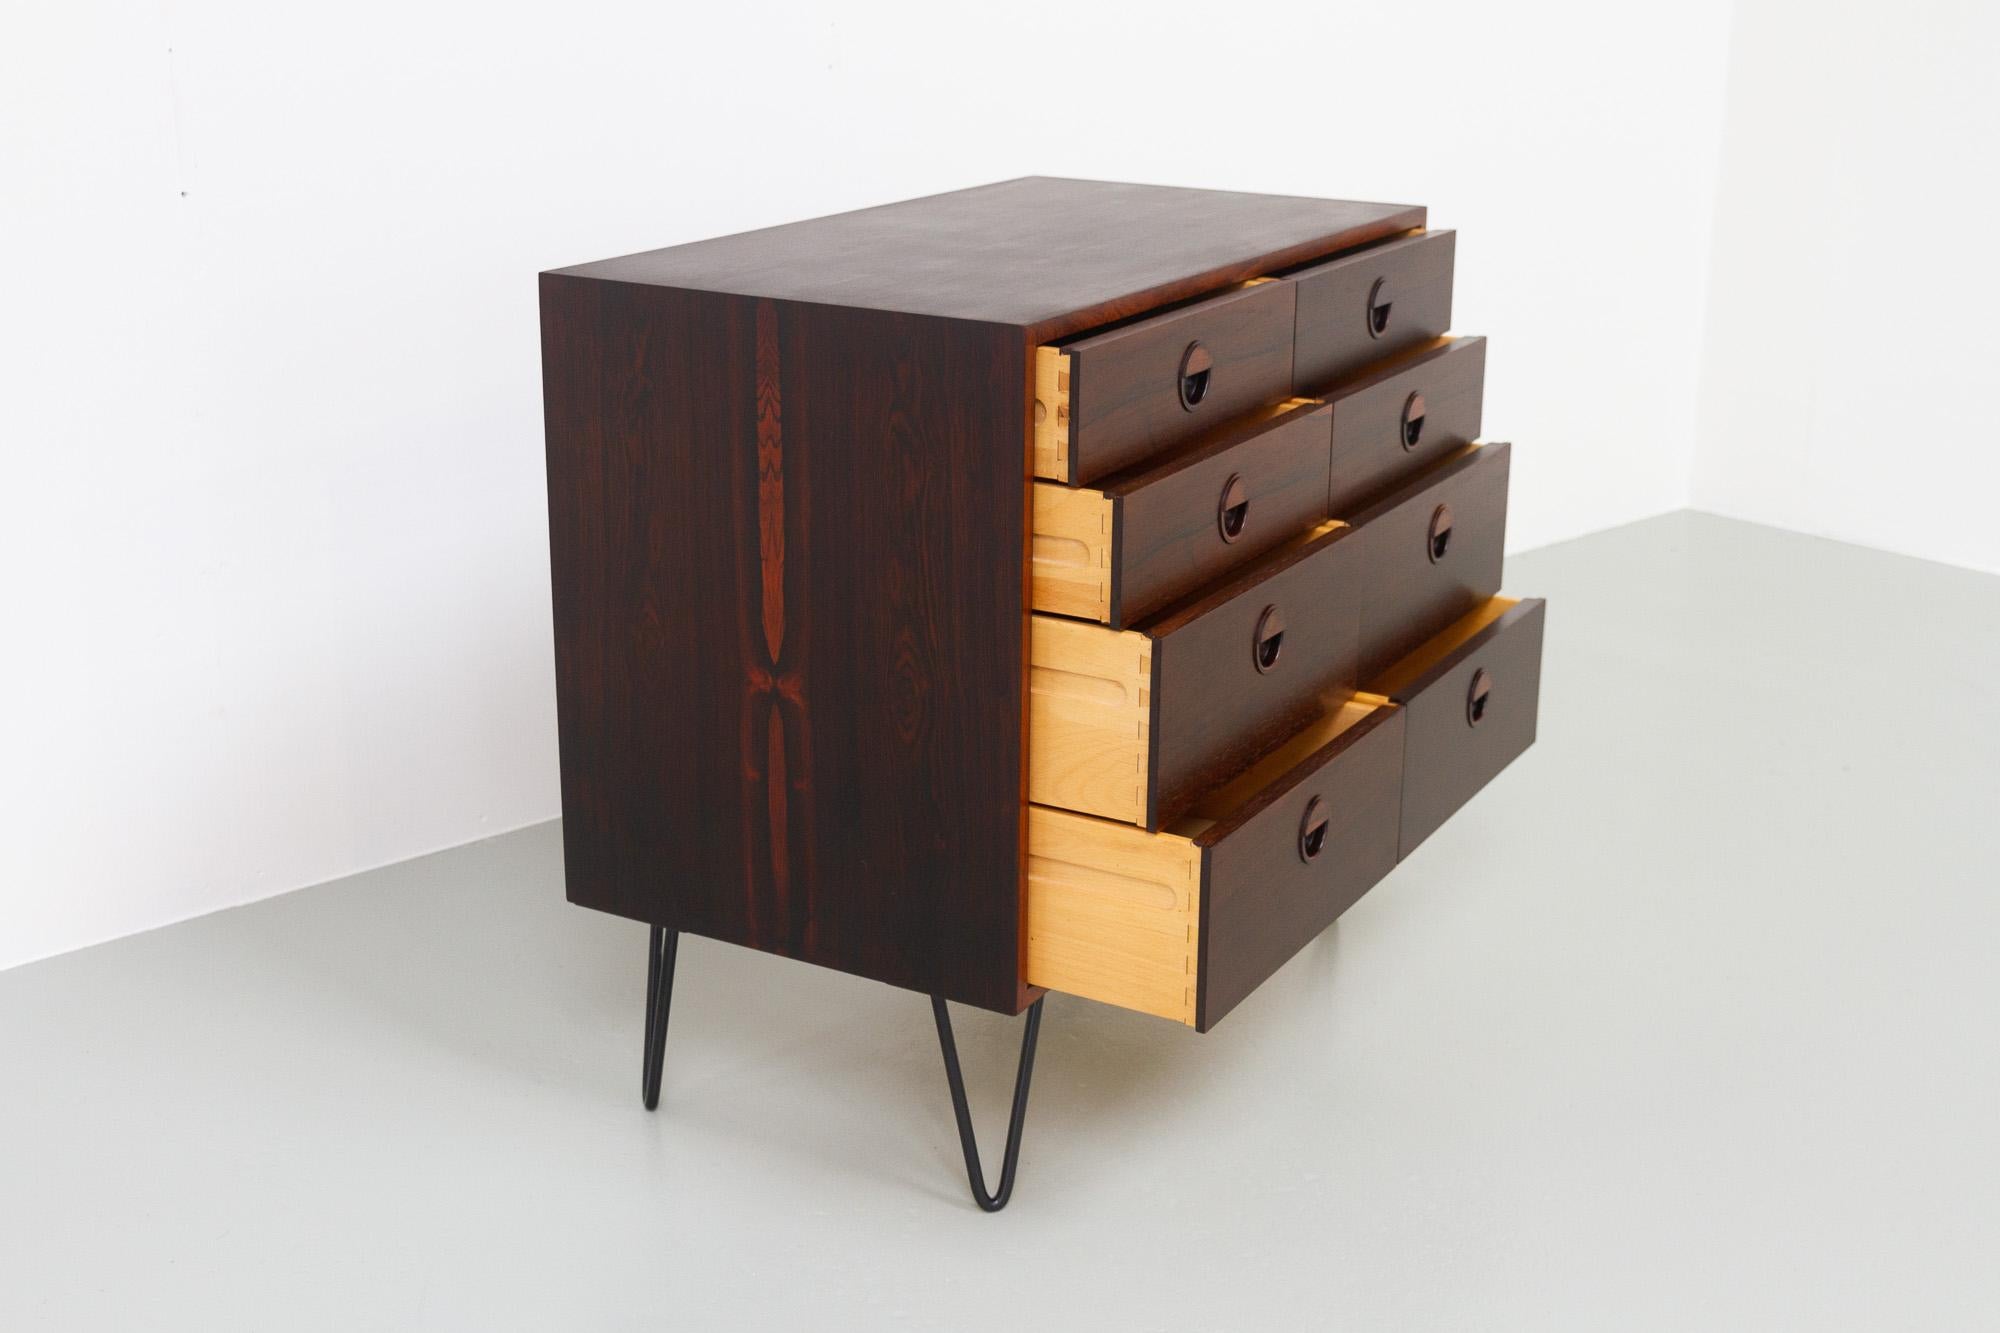 Vintage Danish Rosewood Chest of Drawers by Hg Furniture, 1960s For Sale 1